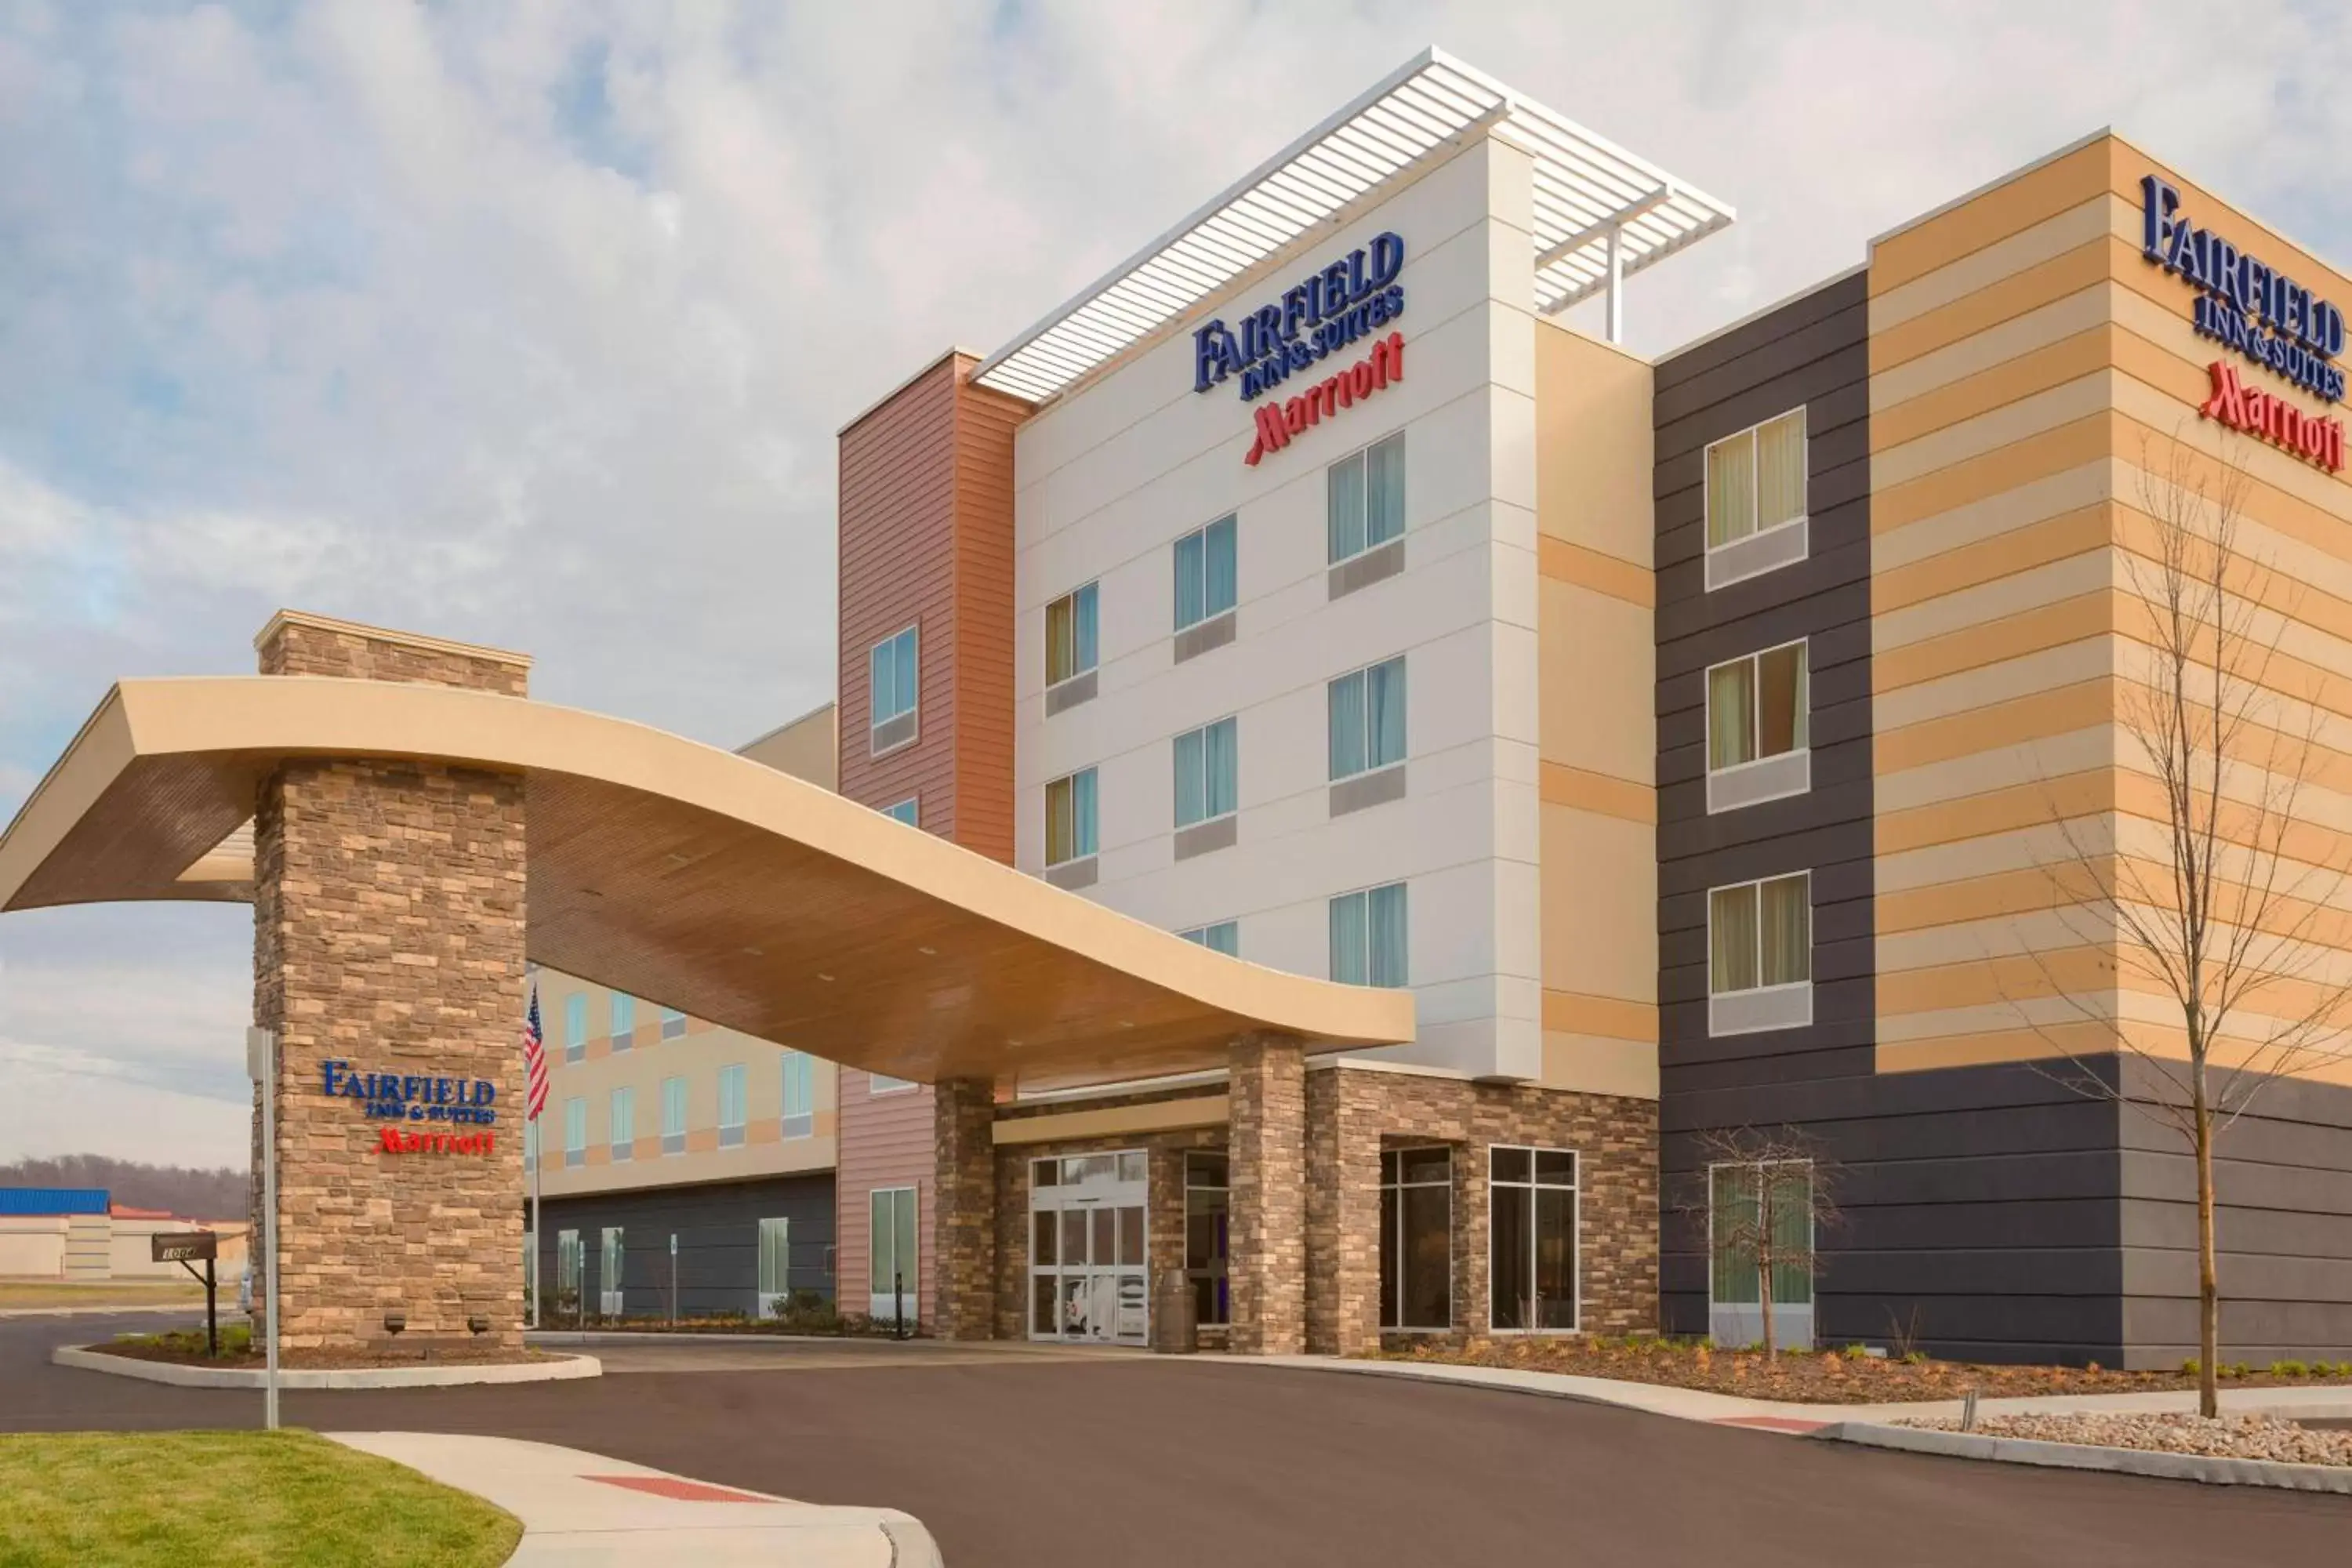 Property Building in Fairfield Inn & Suites by Marriott Pittsburgh Airport/Robinson Township